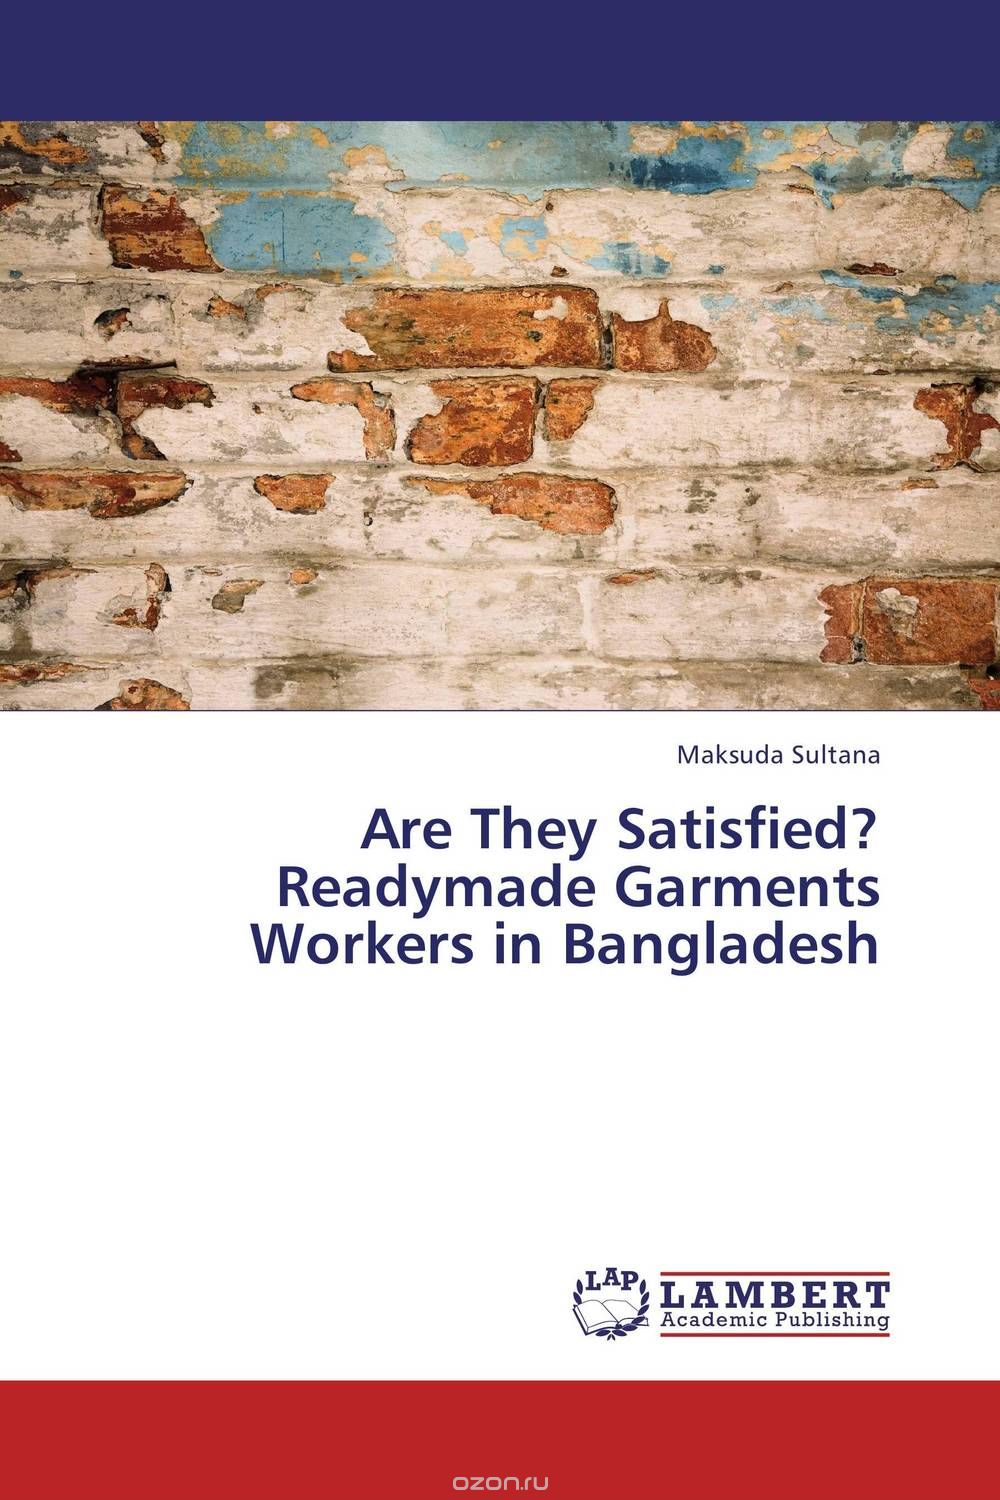 Are They Satisfied? Readymade Garments Workers in Bangladesh